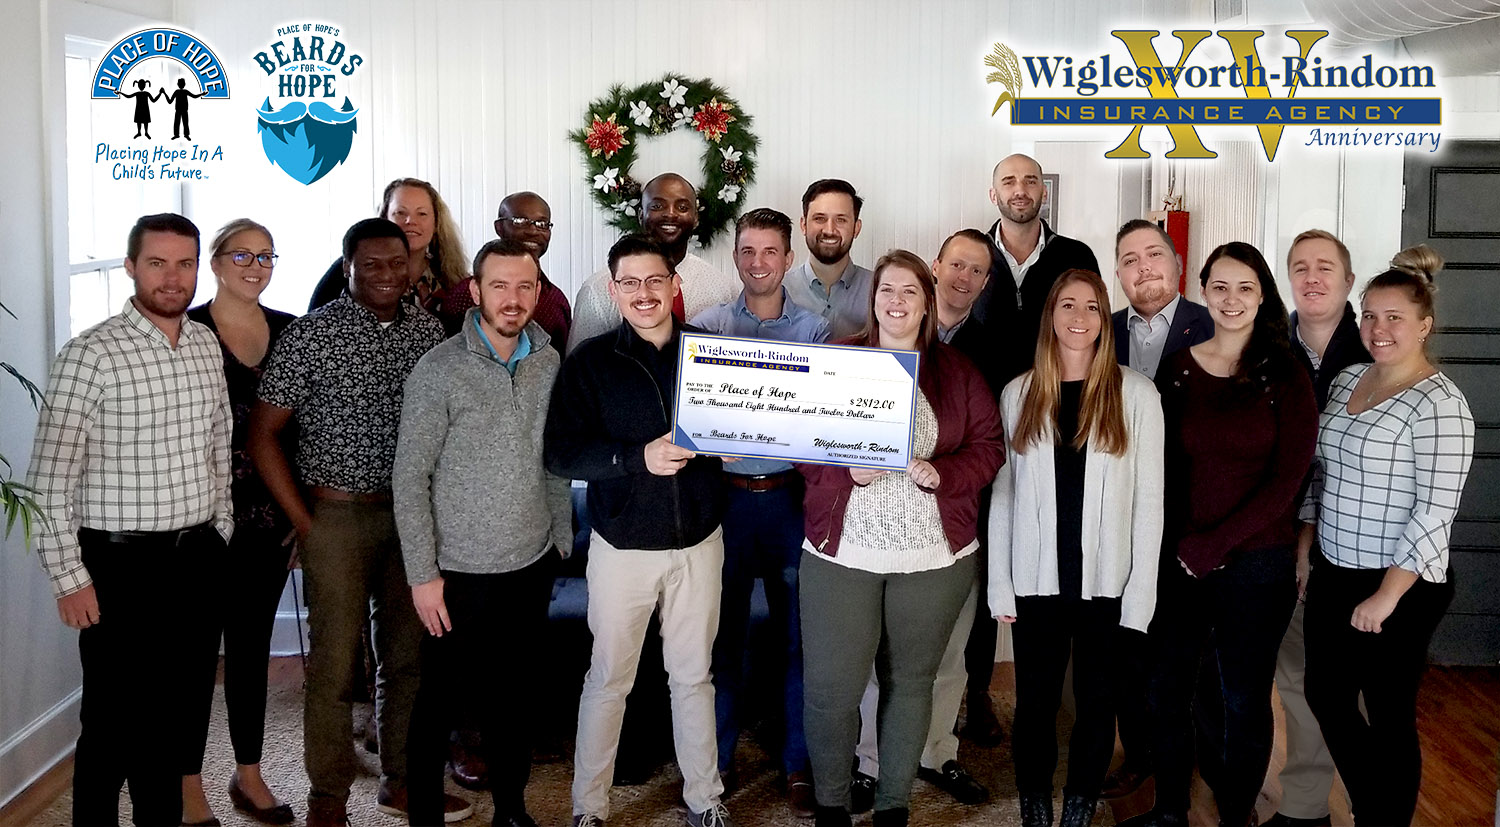 All 20 Insurance Agents holding a giant check for the grand total of the charity donation